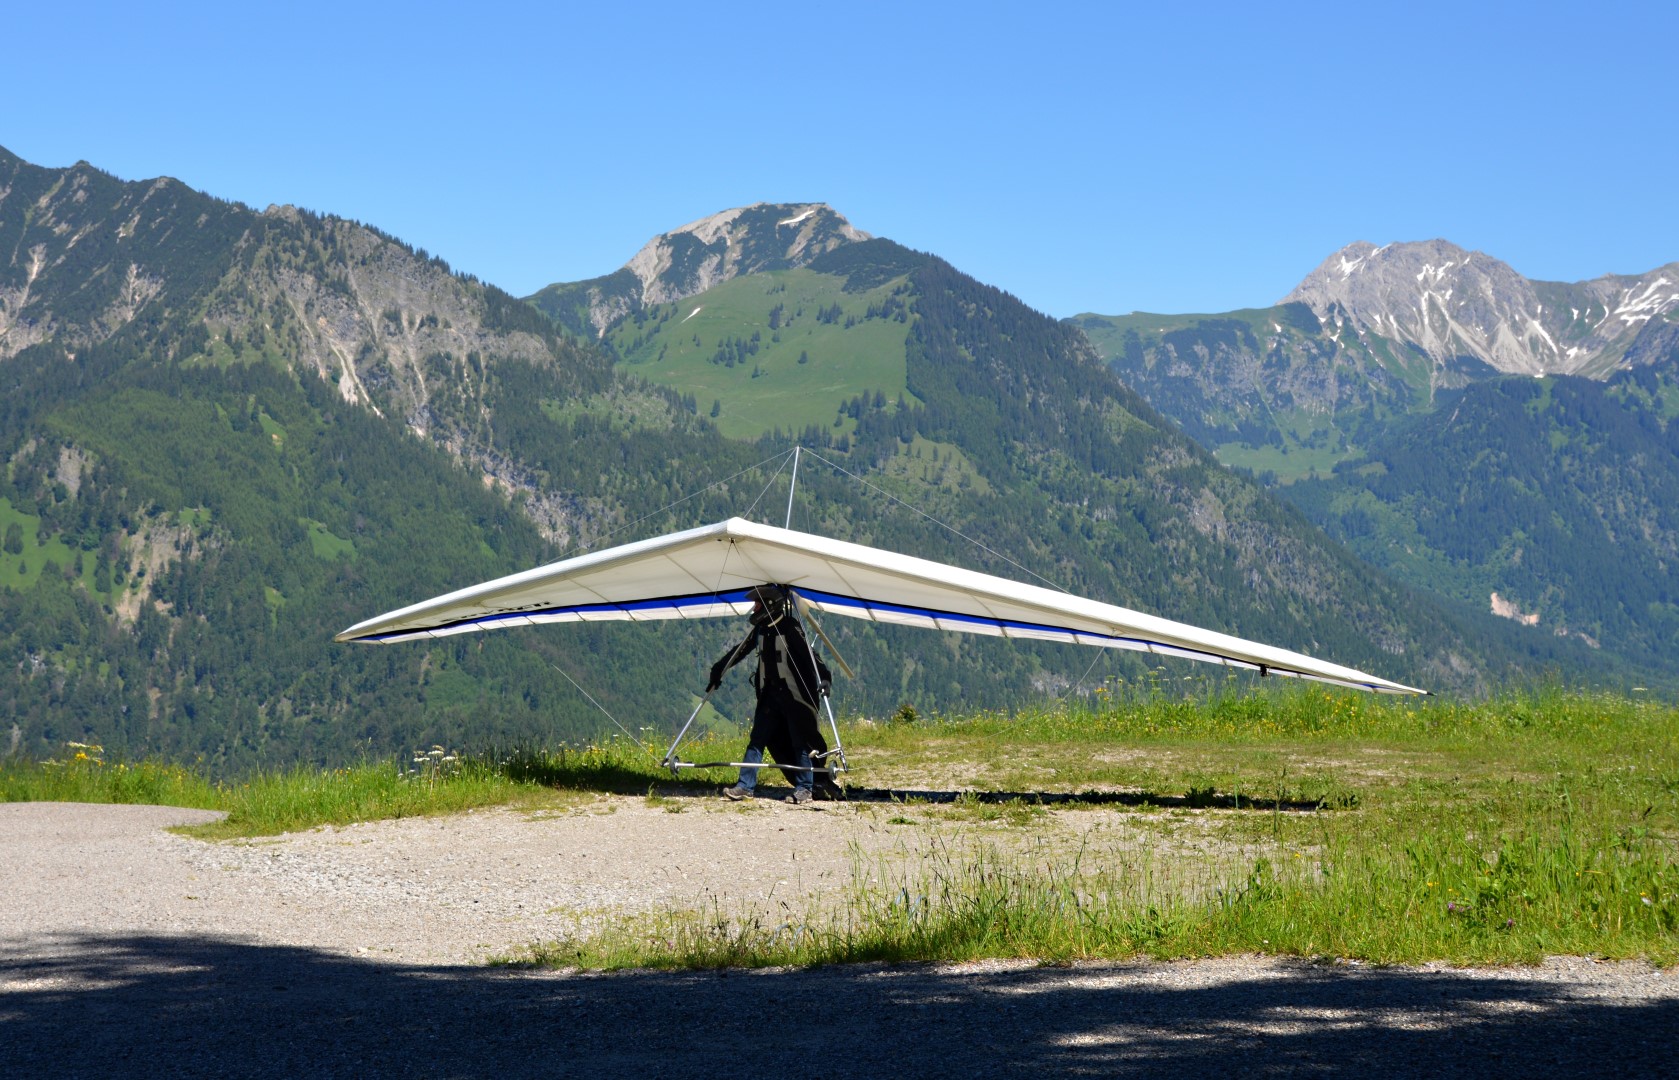 How it is done and how to operate the hang glider